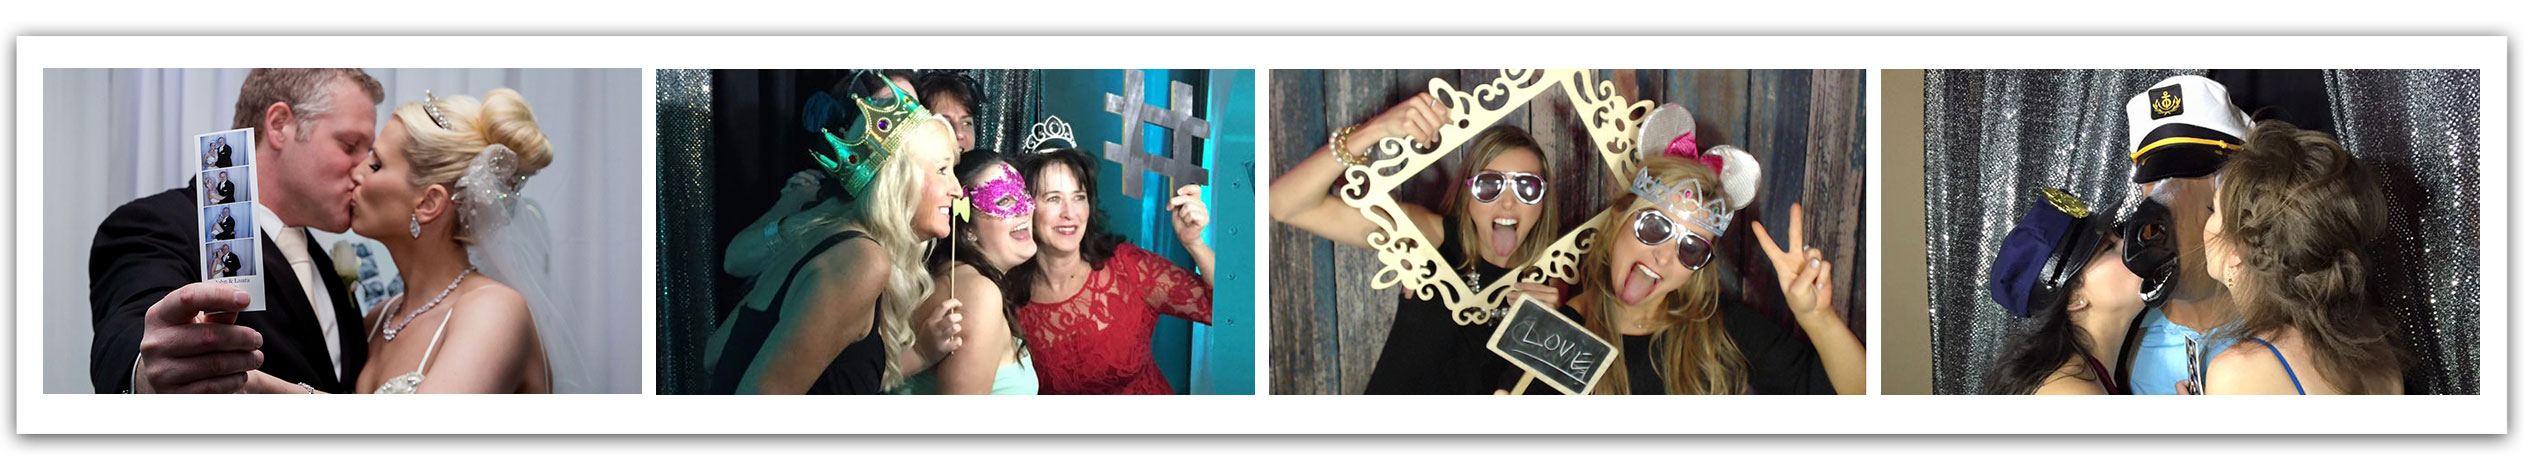 photo stations, photo booth, photo strip